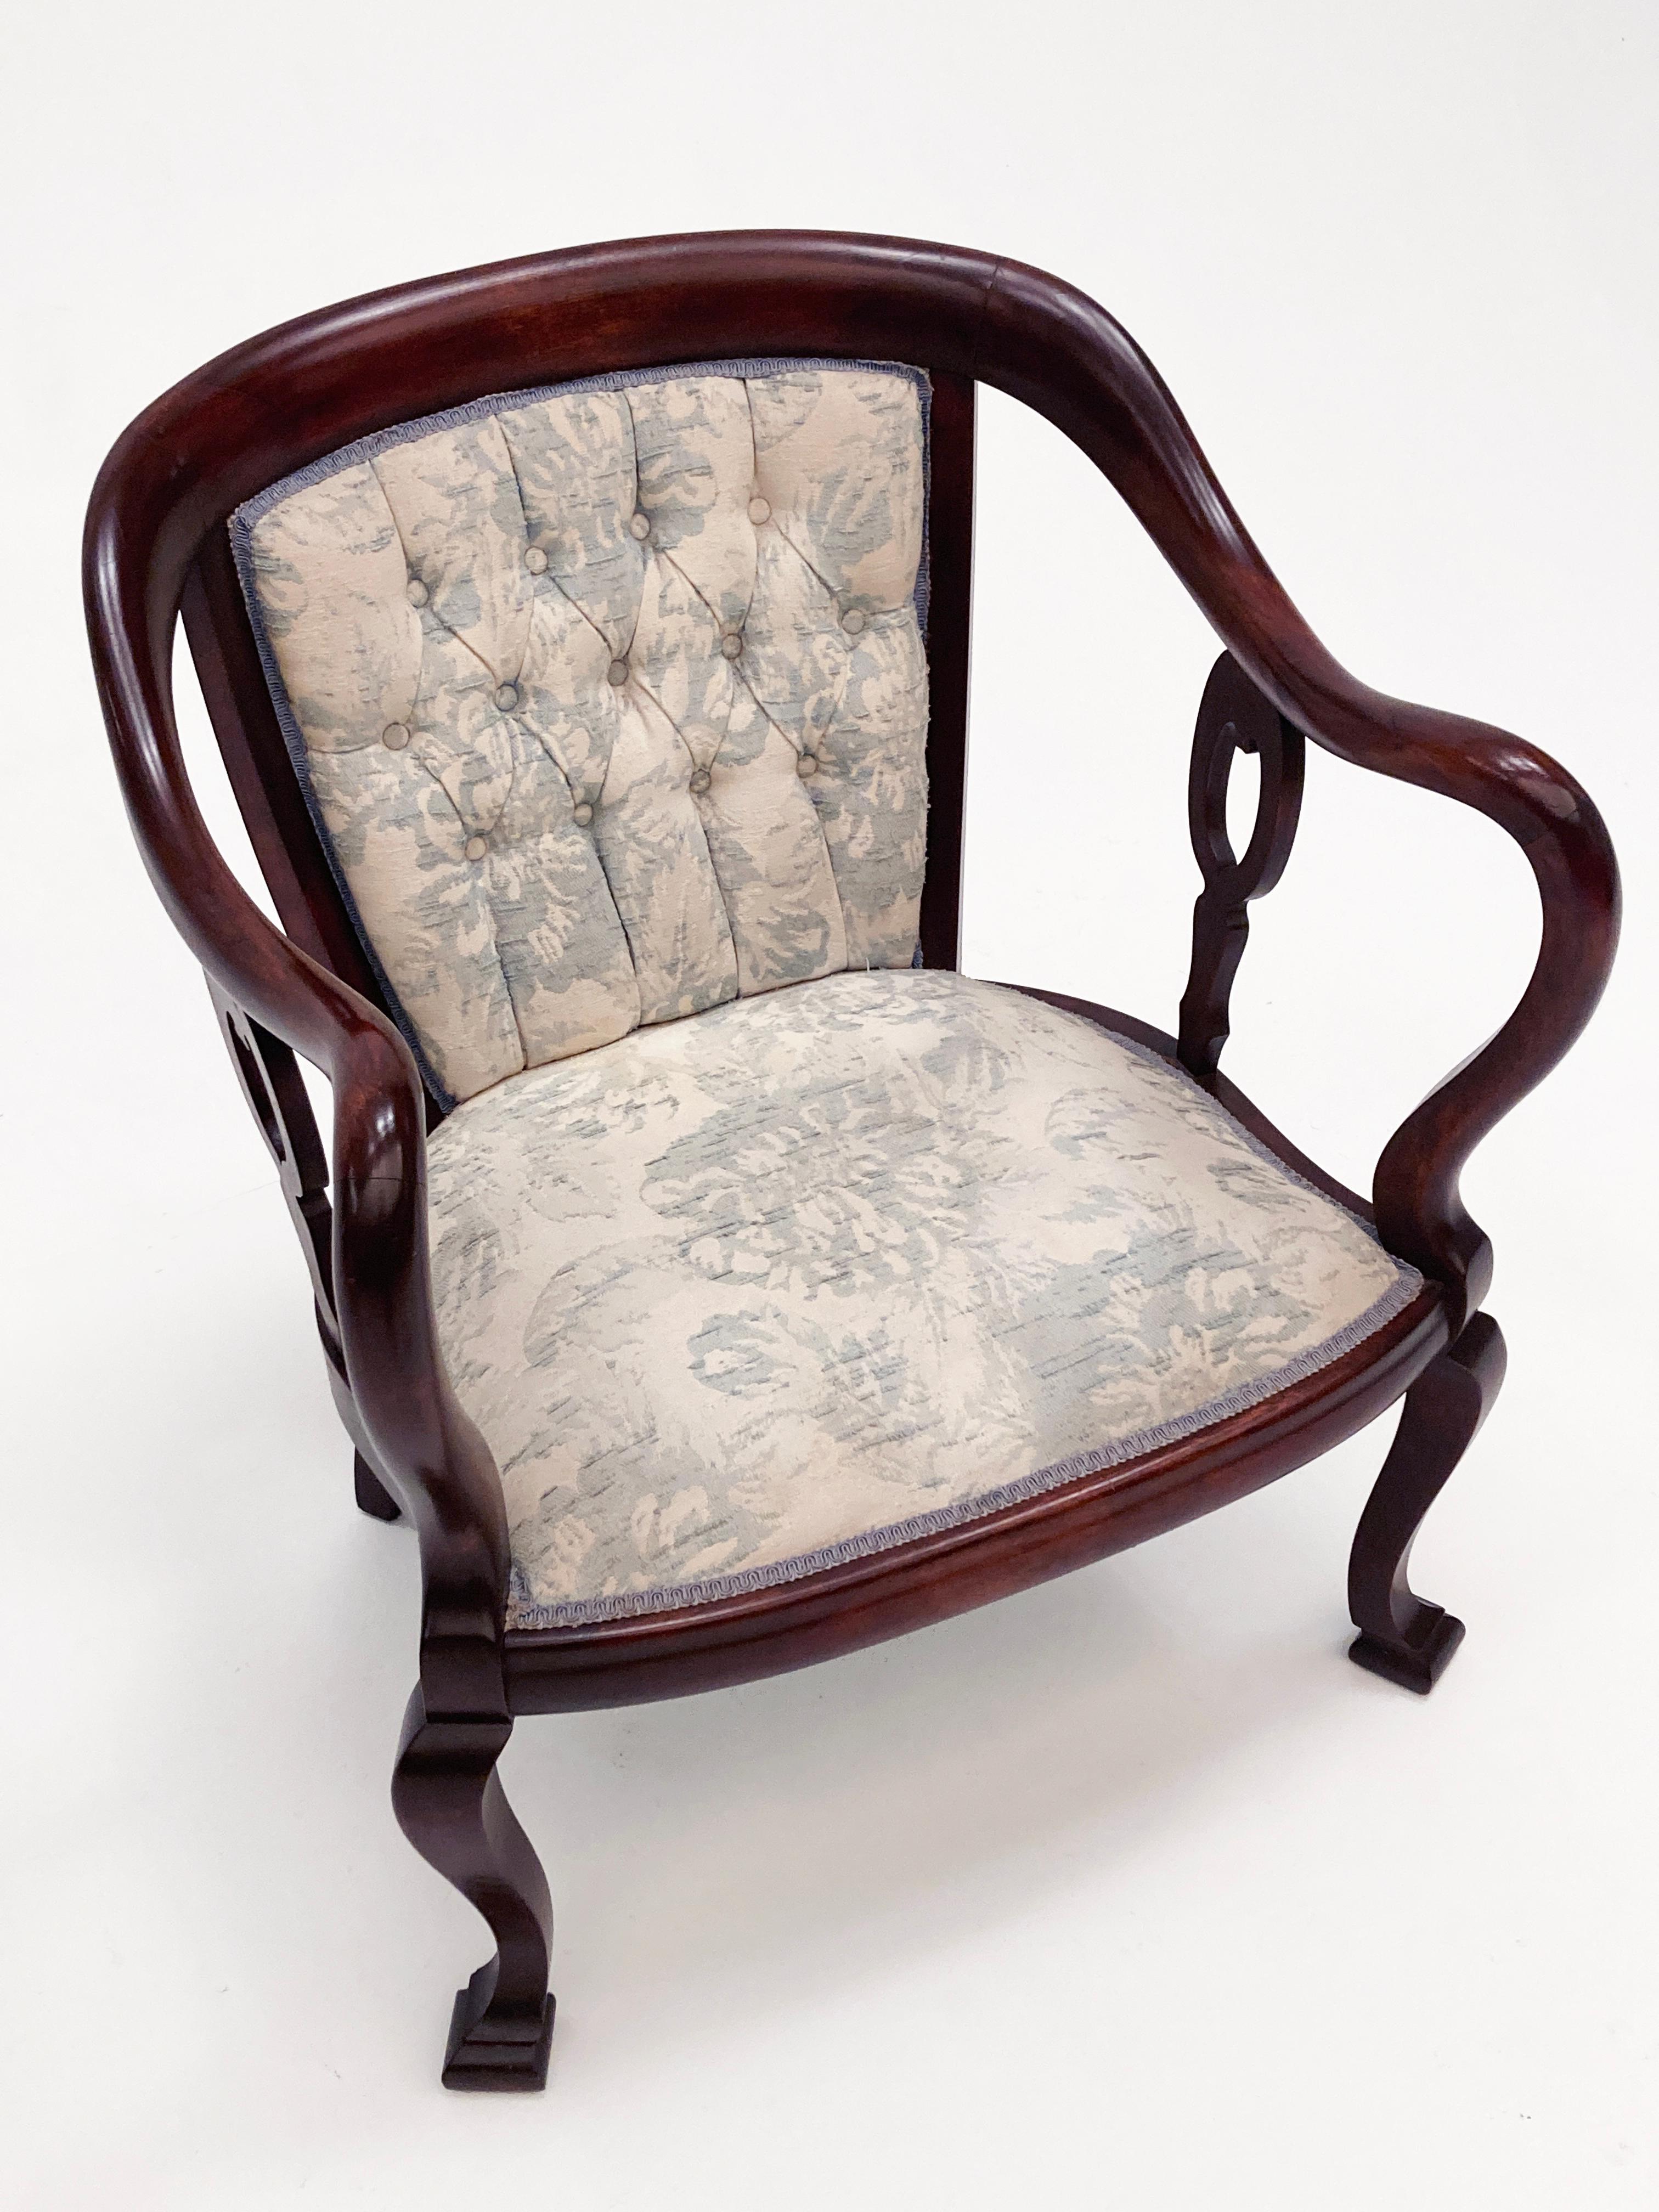 19th Century English Mahogany Settee, Chair and Rocker - Set of Three  For Sale 3